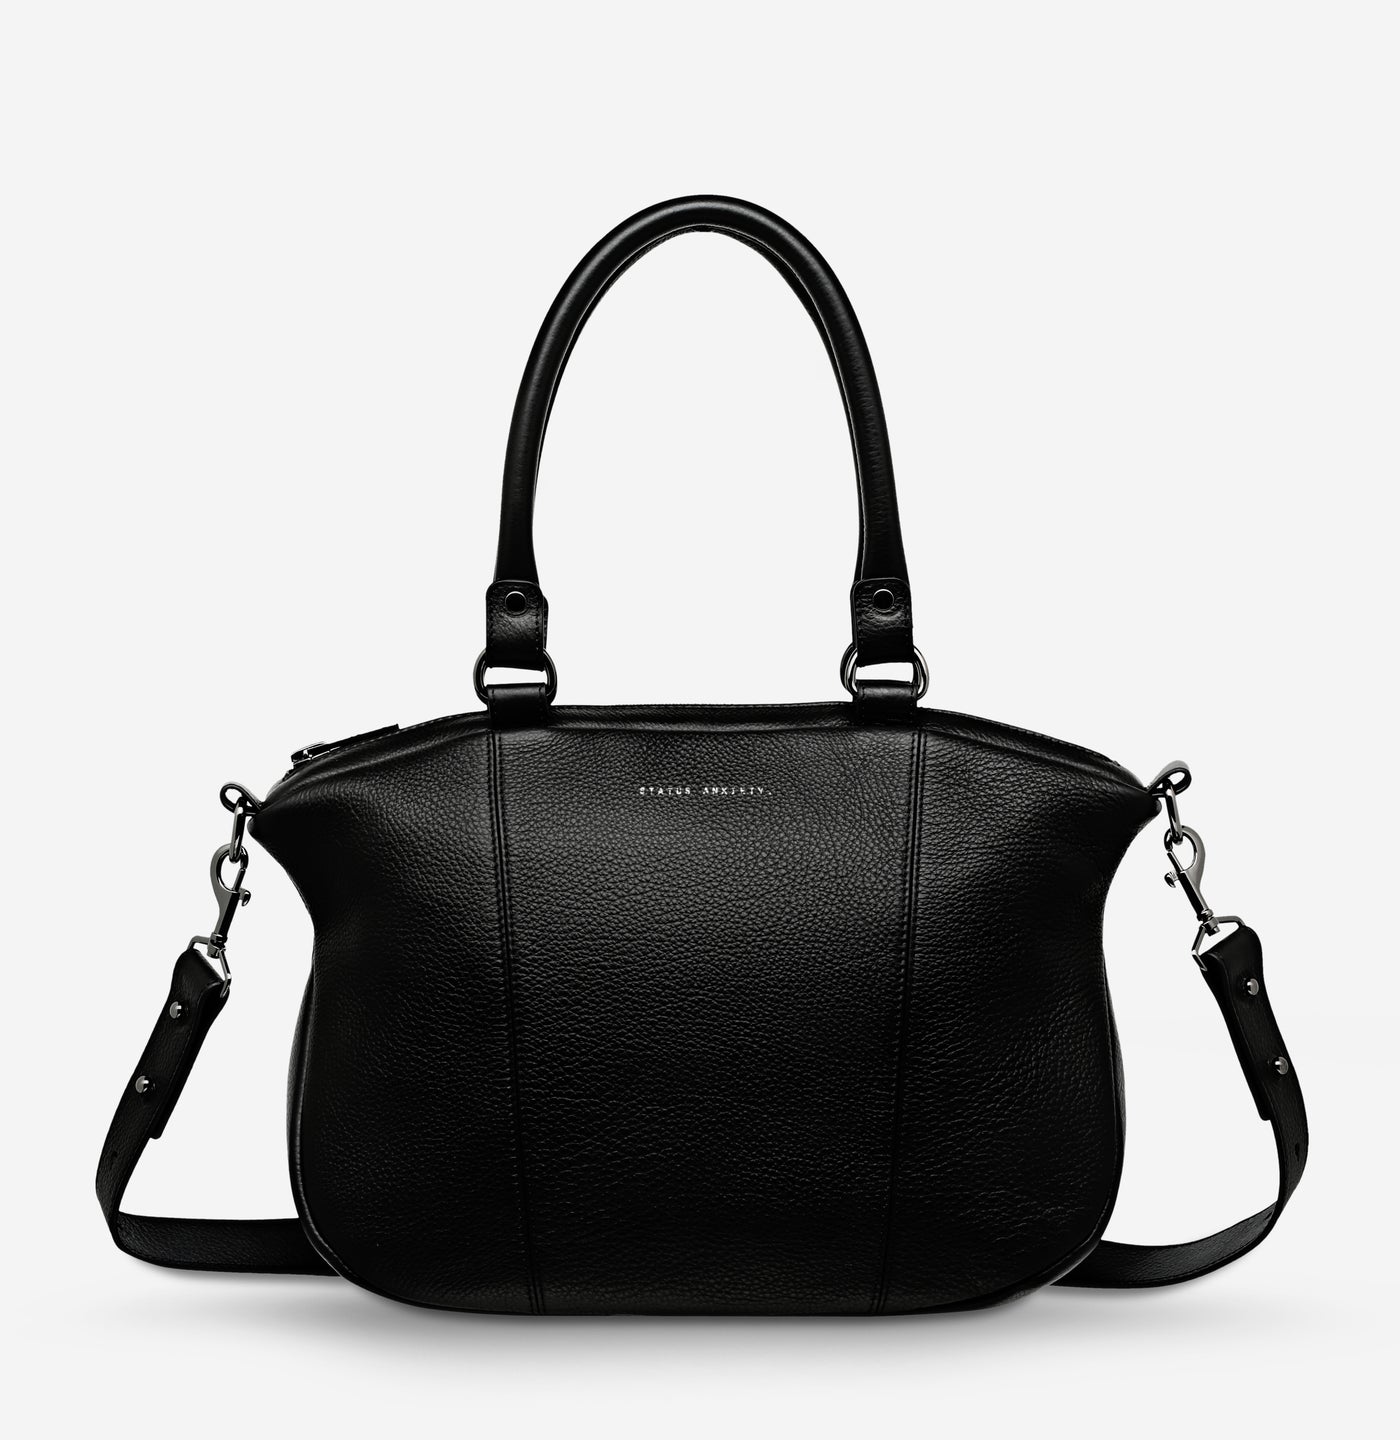 Eyes To The Wind Leather Bag - Black